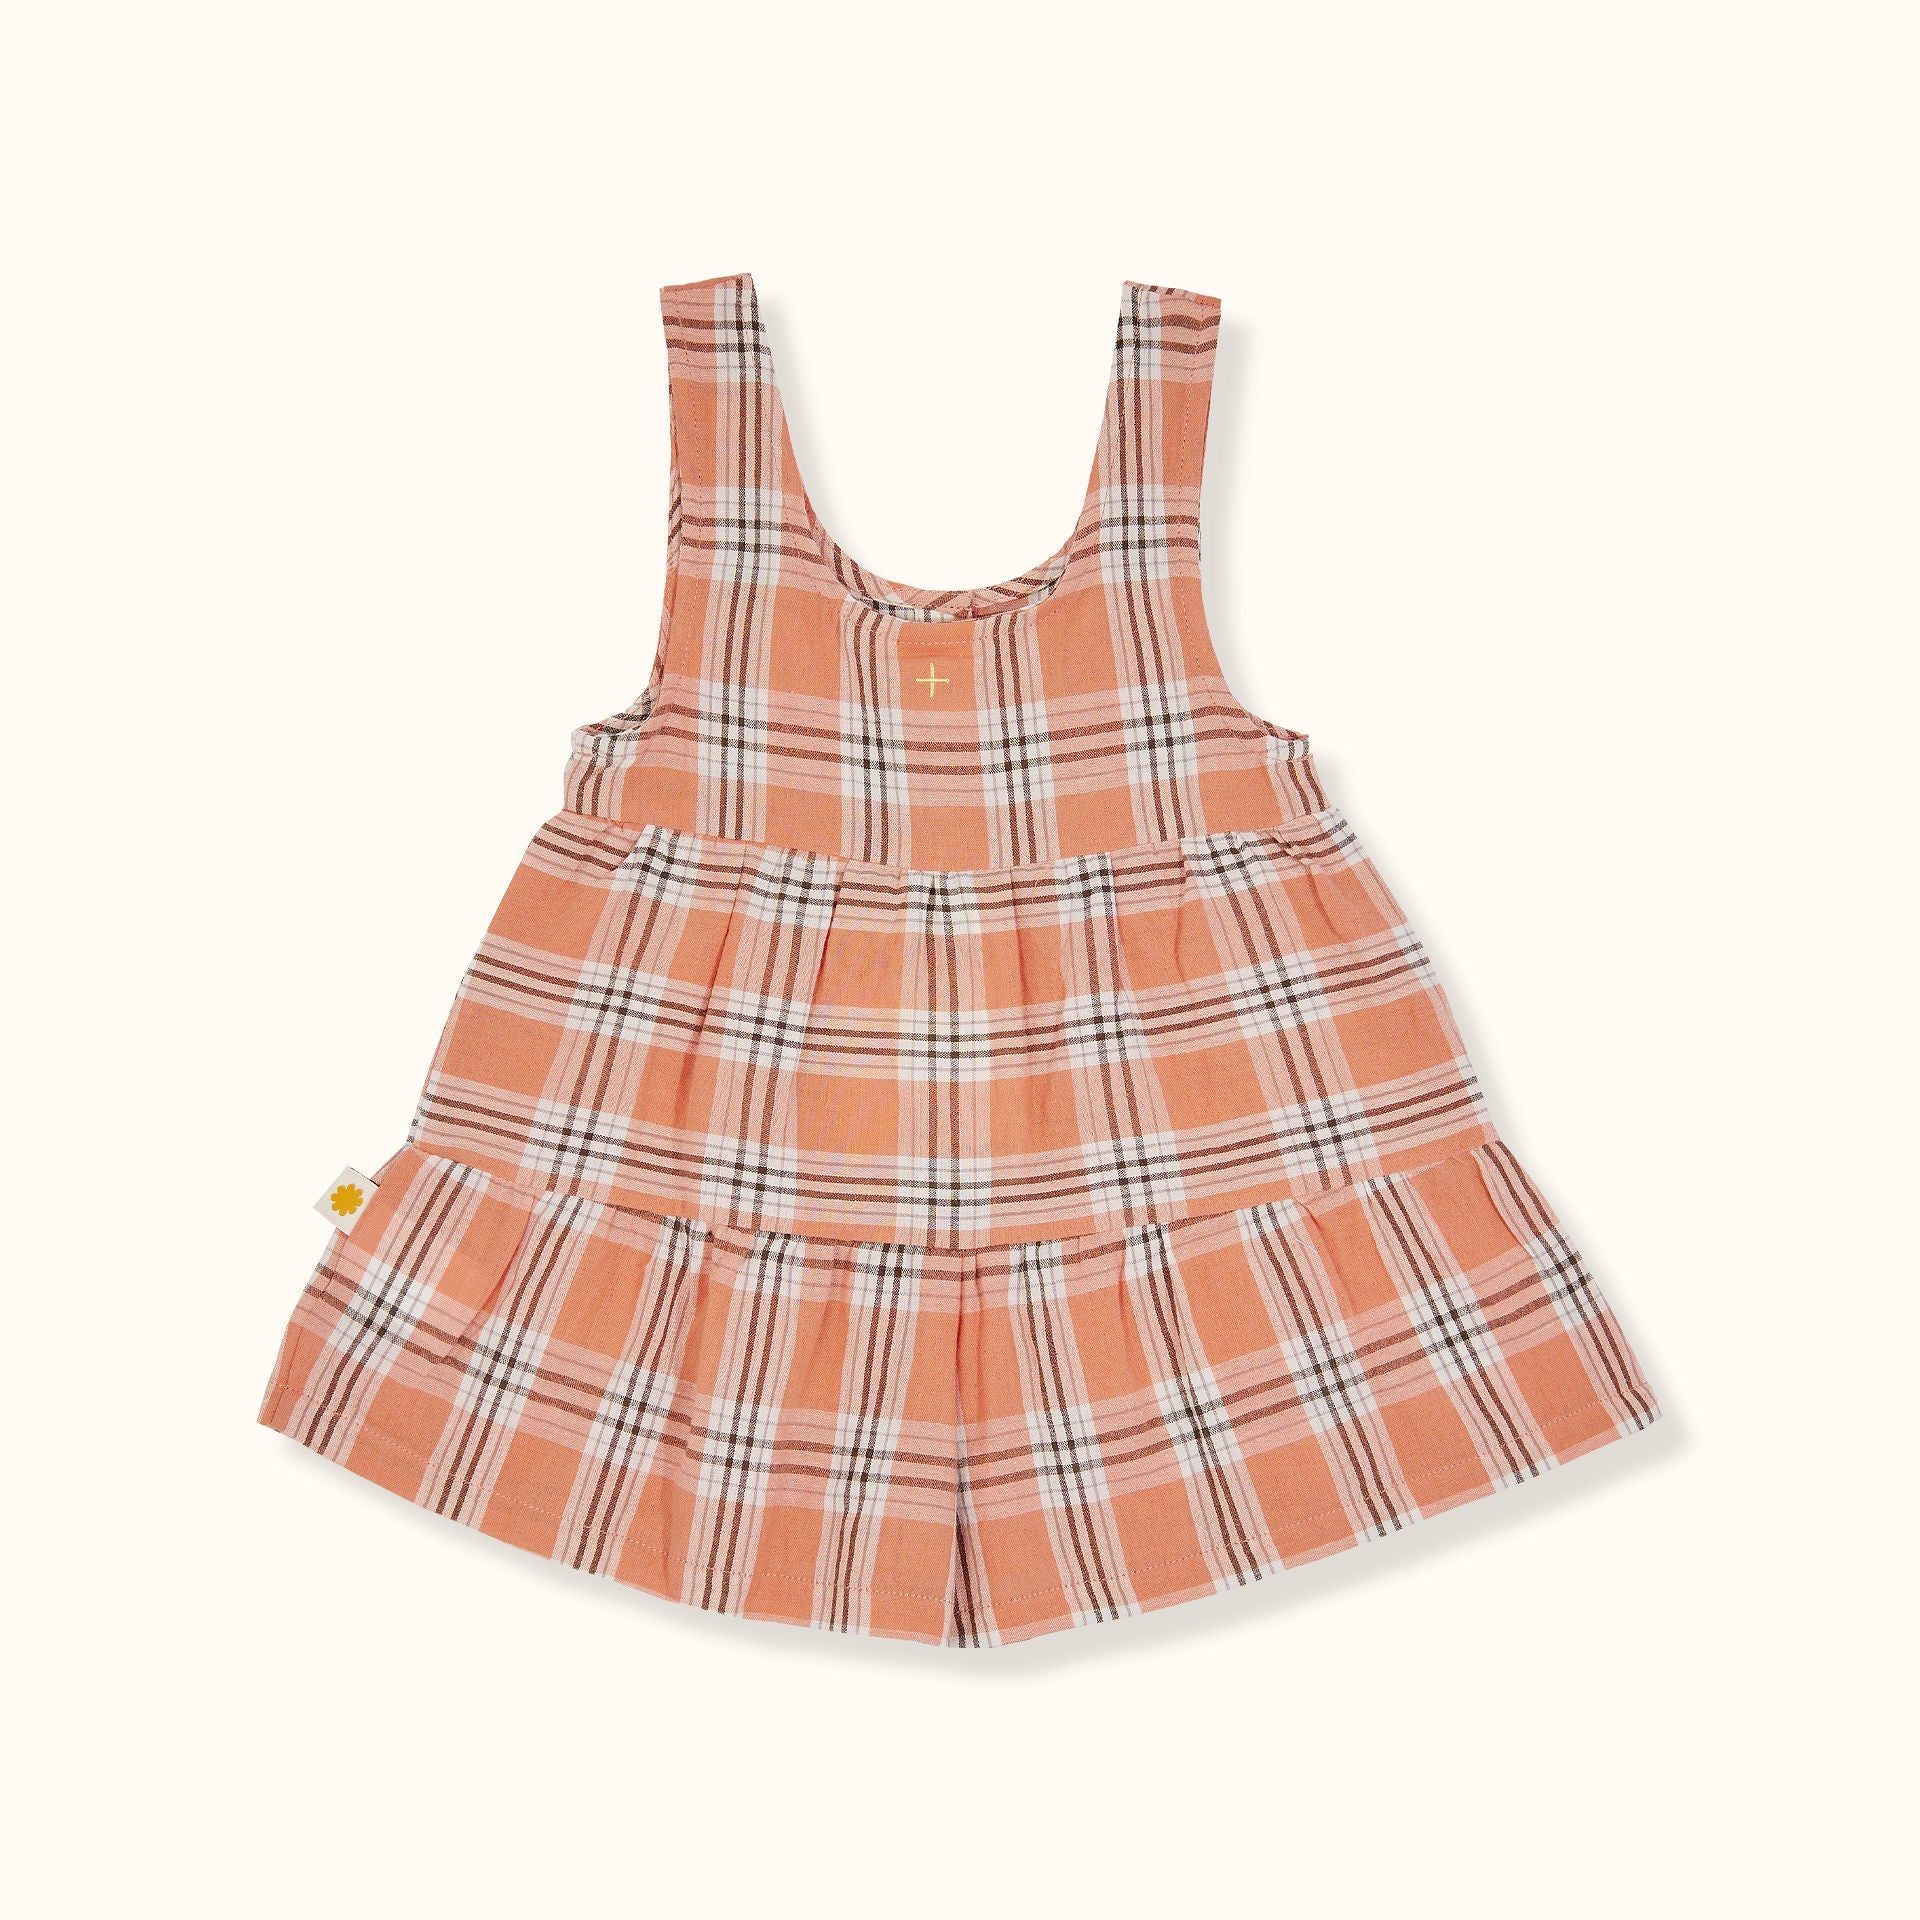 Goldie 7 Ace - LAYLA SHORTALLS - APRICOT GINGHAM